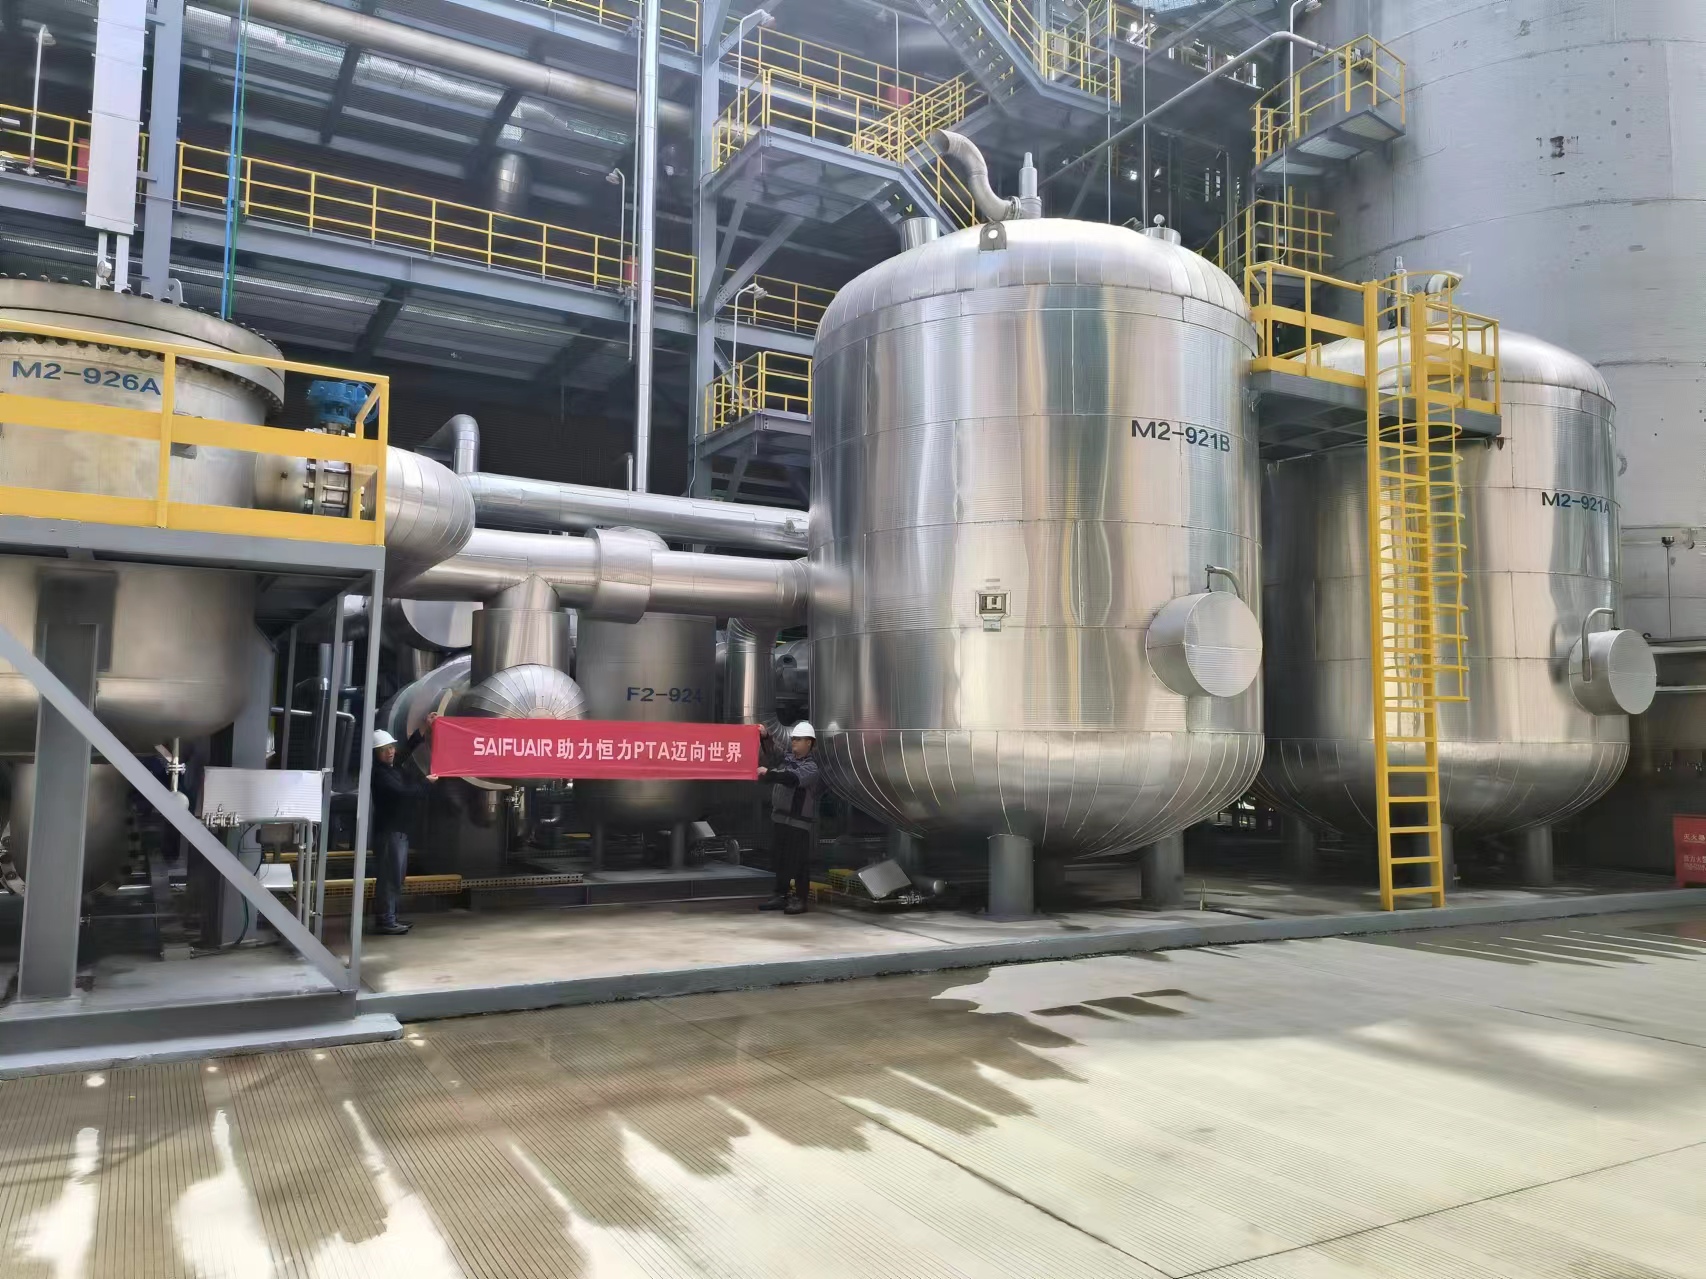 Exhaust drying system of large petrochemical base